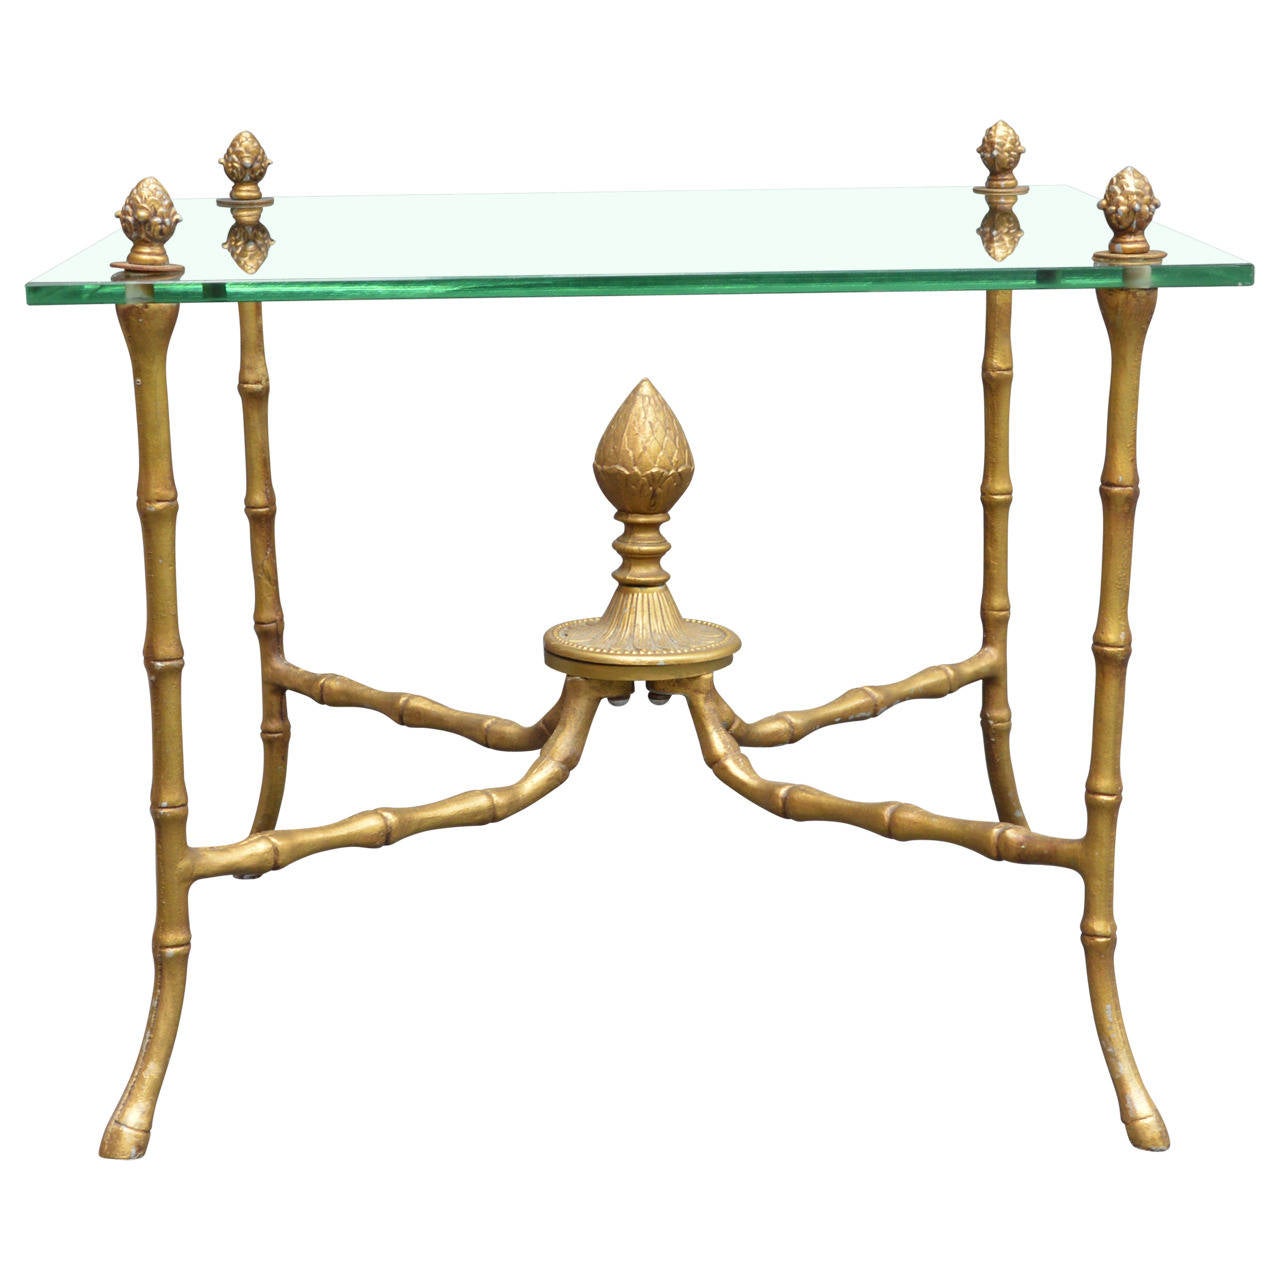 Nicely gilded faux bamboo brass and glass side table with pineapple accents and cloven feet.